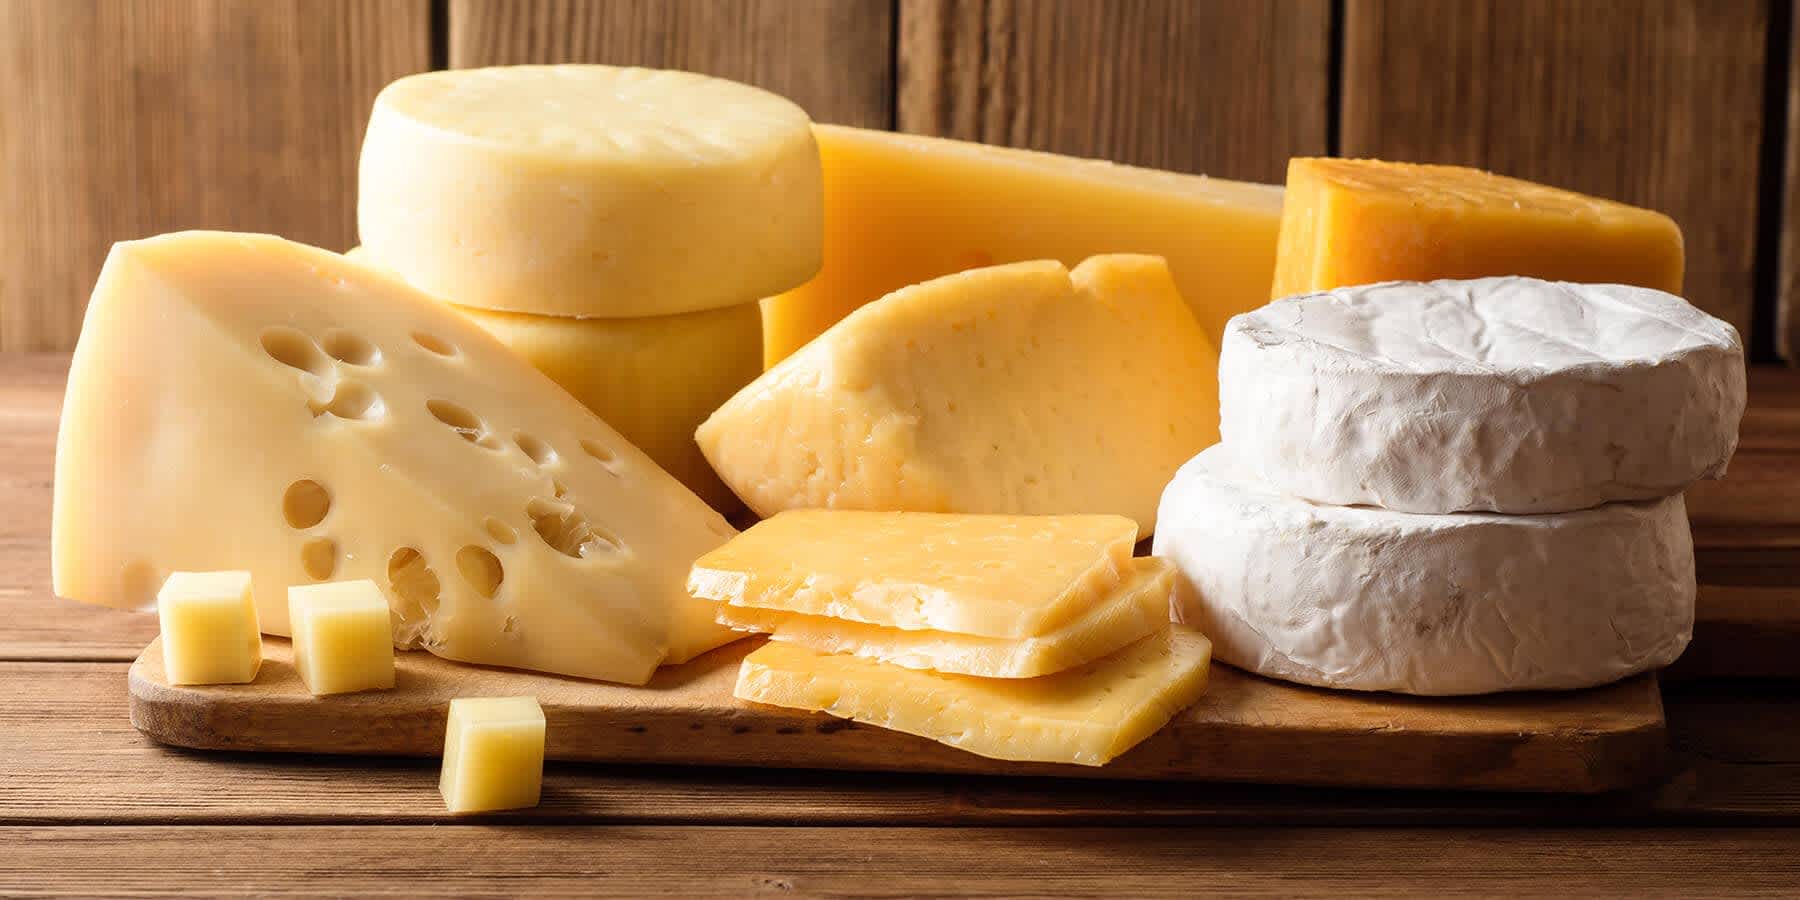 Variety of cheeses with high cholesterol that's linked with obesity